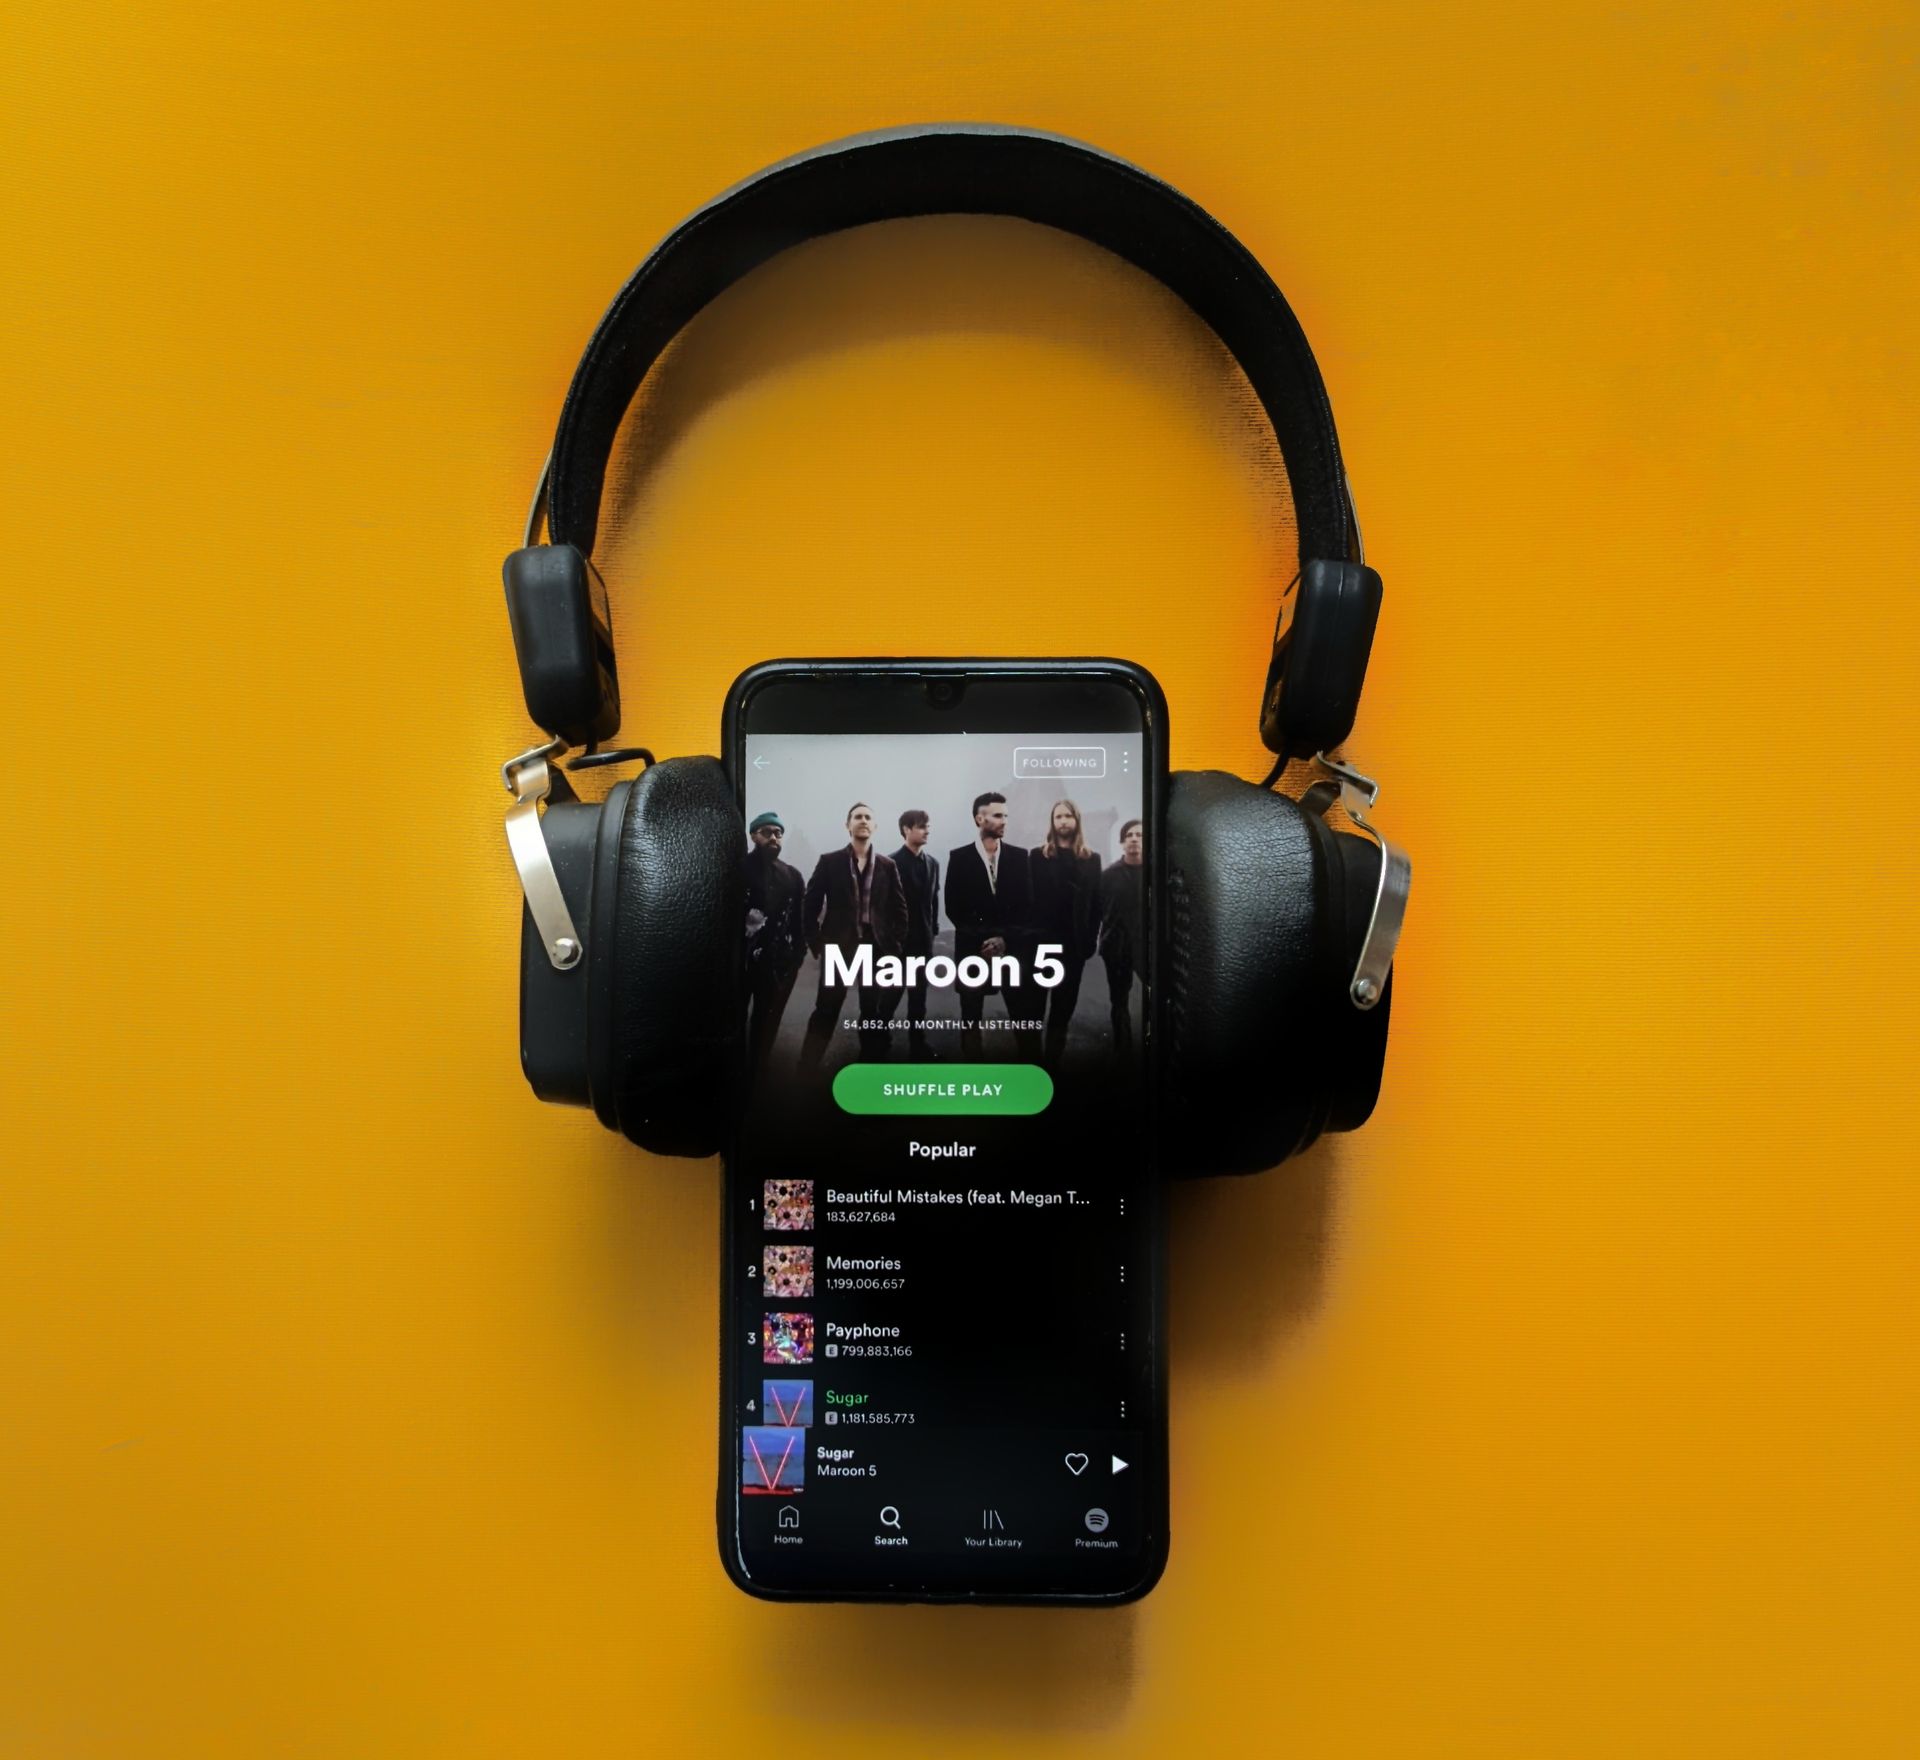 Spotify Wrapped 2023 release date and more: Keep reading and learn when does Spotify stop tracking for Wrapped 2023 and be ready!